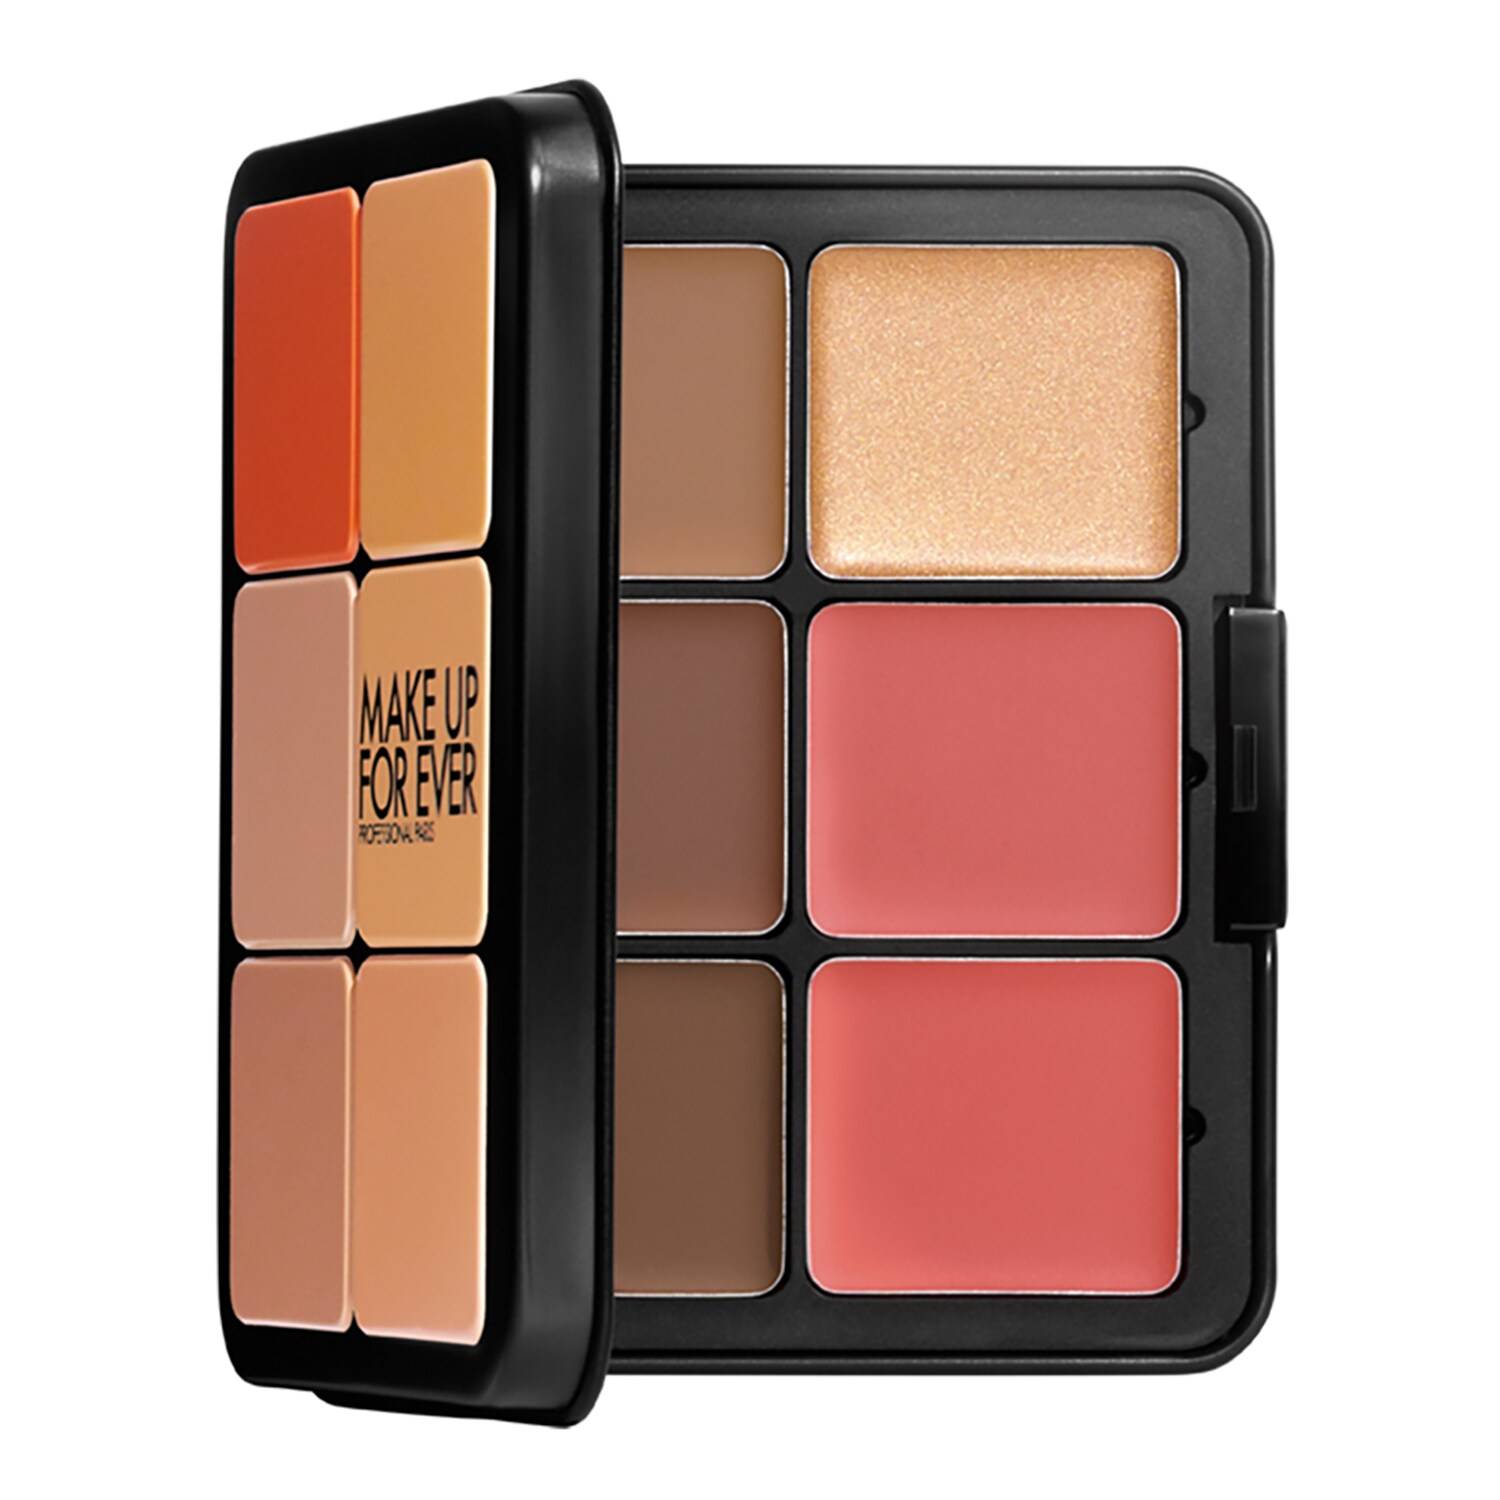 Make Up Forever Hd Skin All-In-One Palette Harmony 2 26.5G